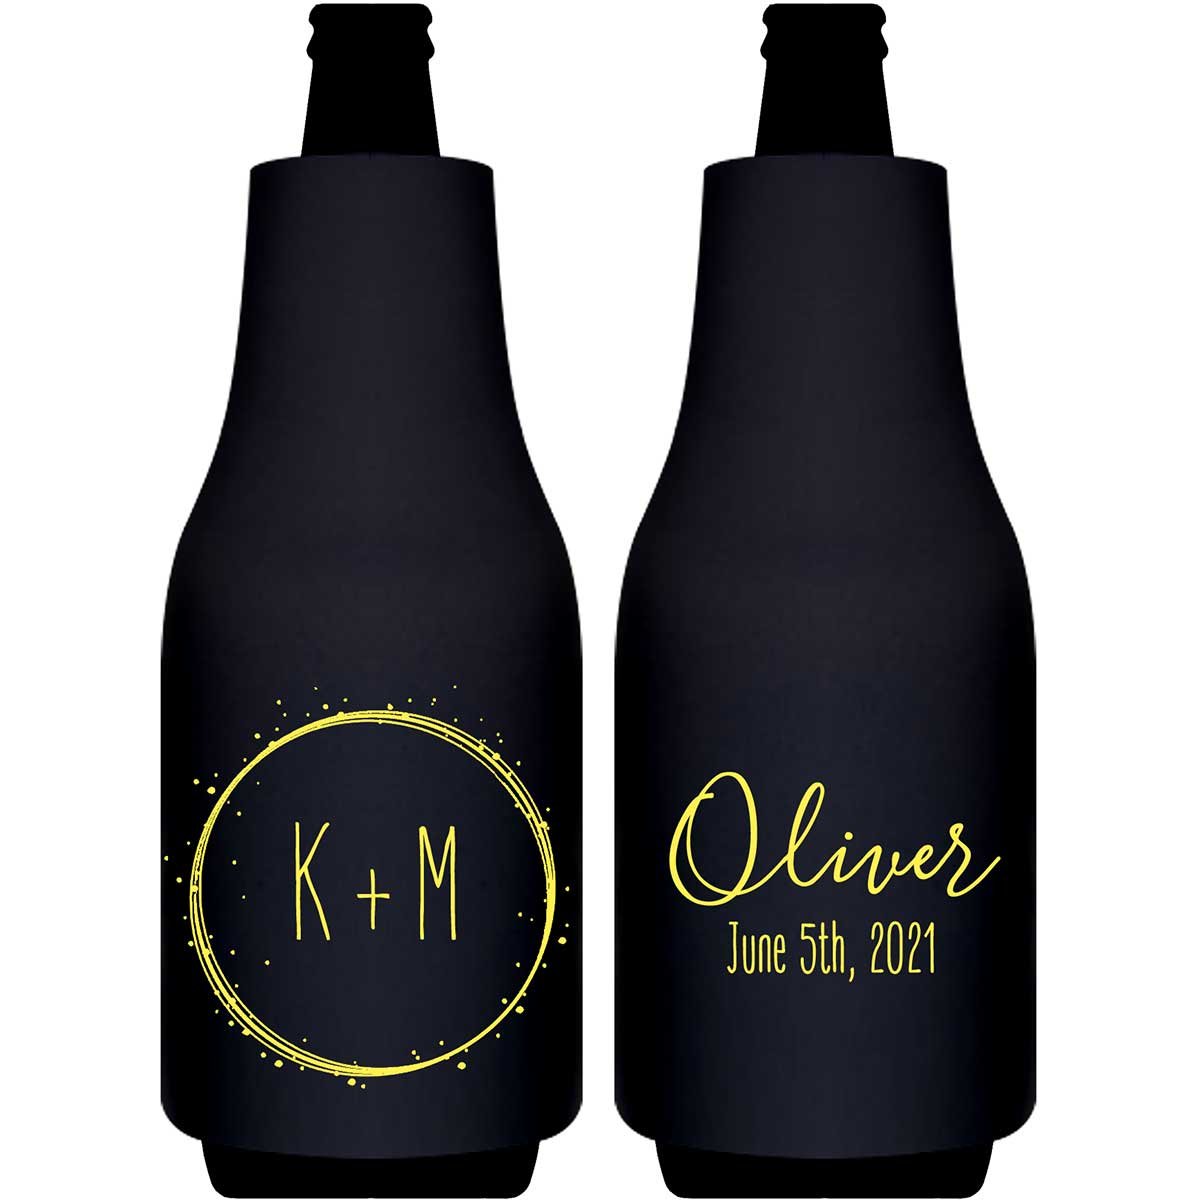 Classic Wedding Design 8A Foldable Bottle Sleeve Koozies Wedding Gifts for Guests